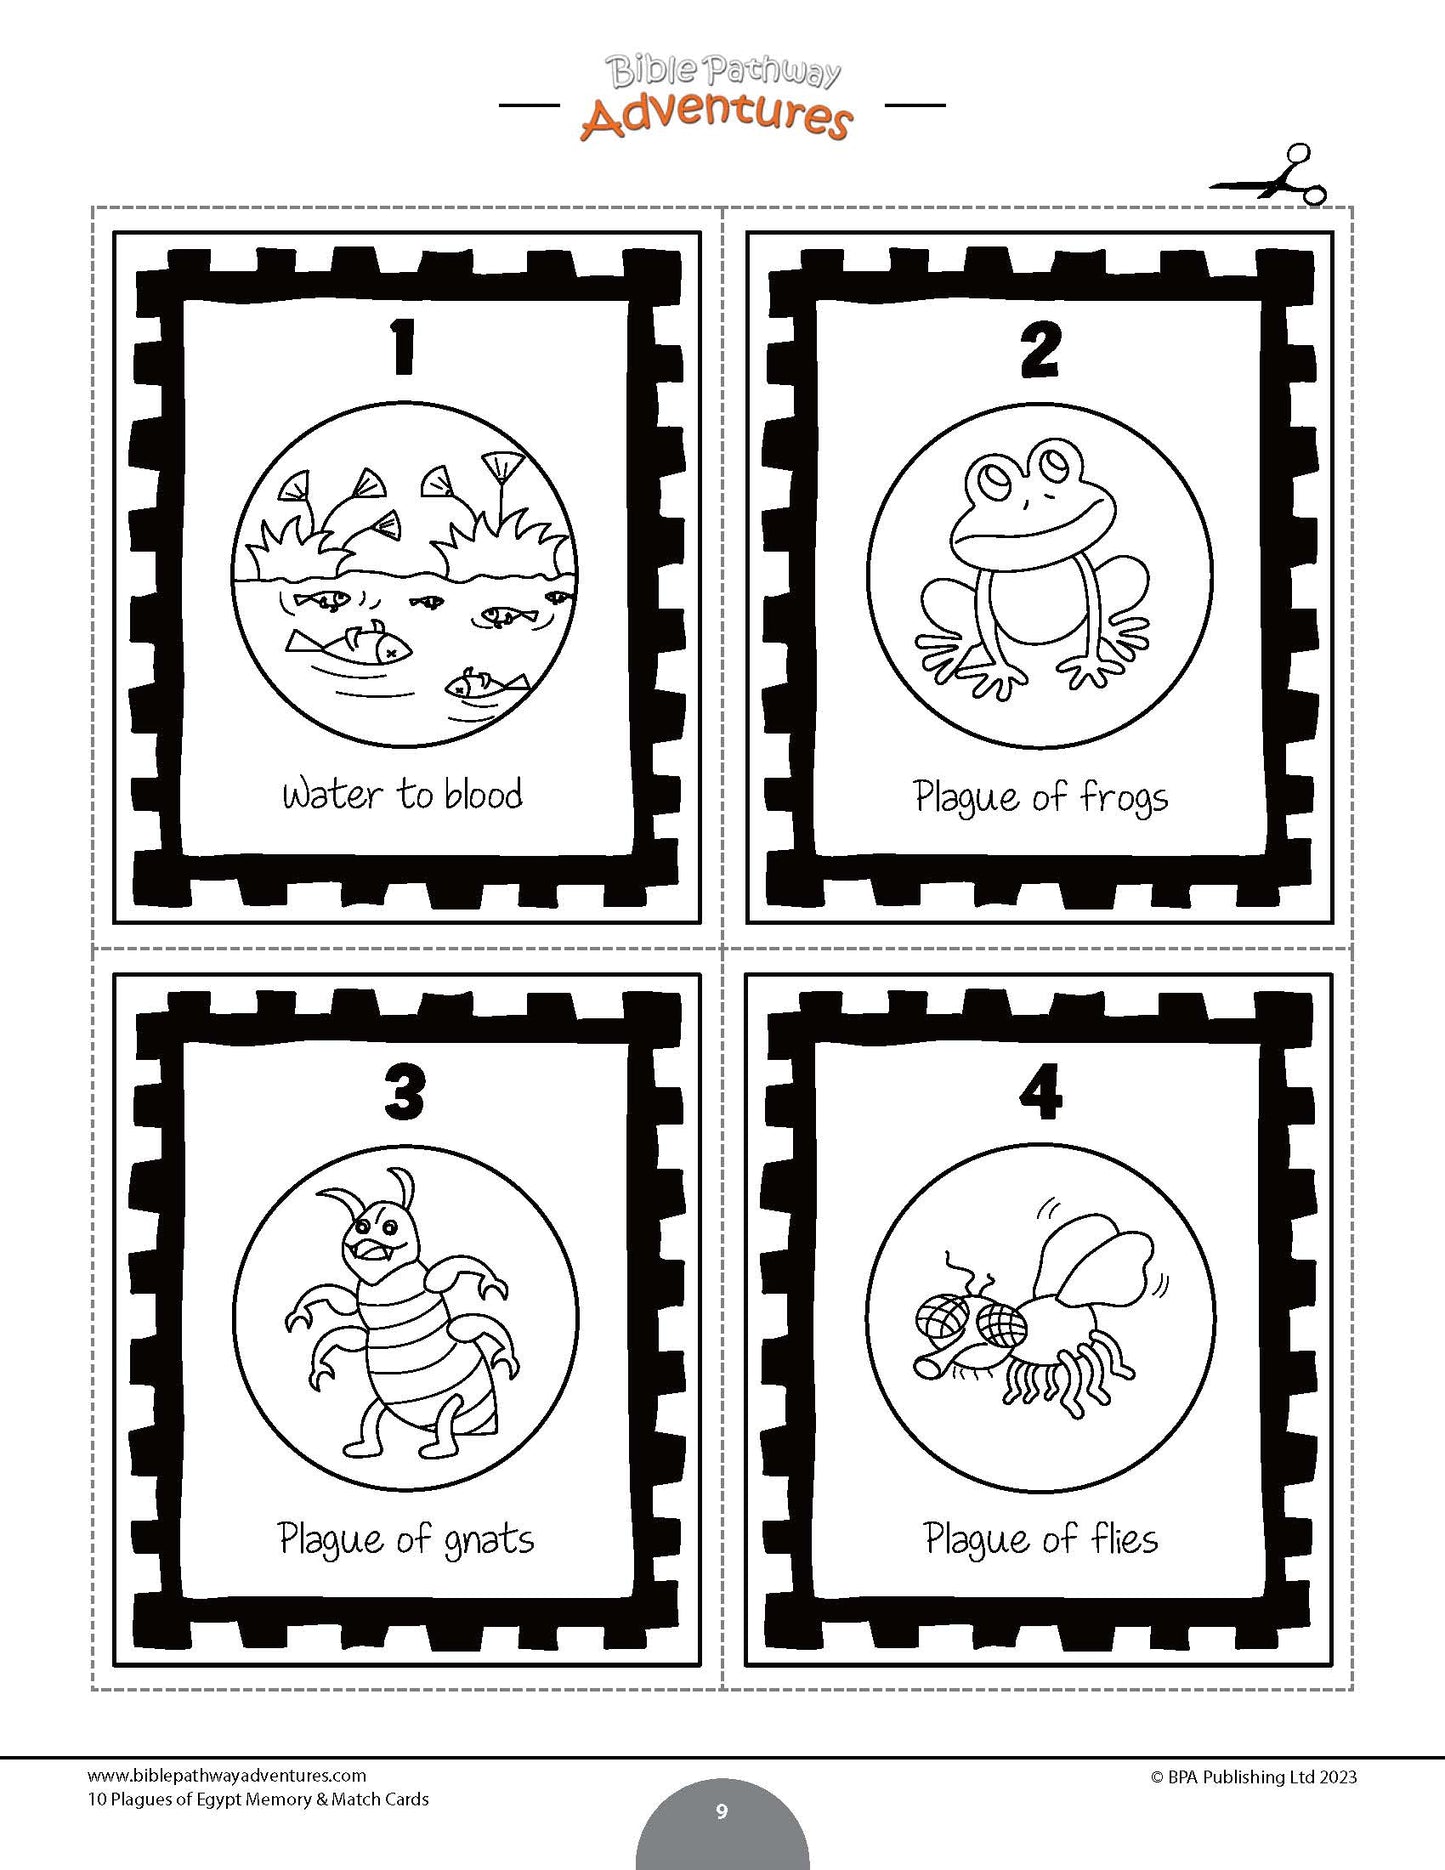 10 Plagues of Egypt Memory & Match Cards (PDF)